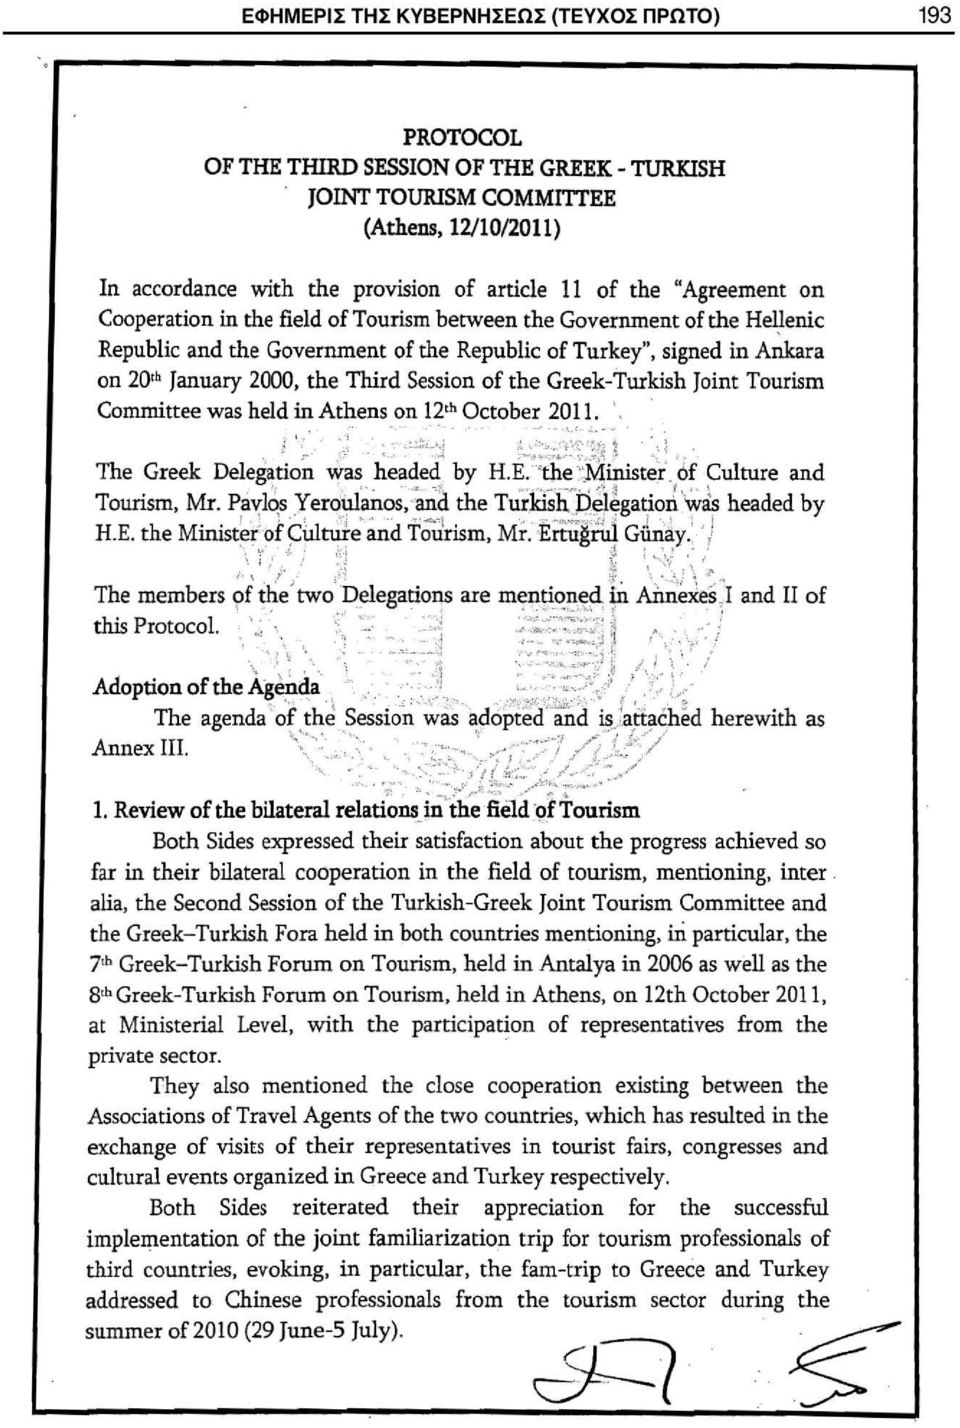 signed in Ankara on 20th January 2000, the τhird Session of the Greek-Ί'urkish Joint Tourism Comrnittee was held in Athens on 12th October 2011. ',. ~ φ~. ~.. ~-~;i~:.i \~~~~~;{!